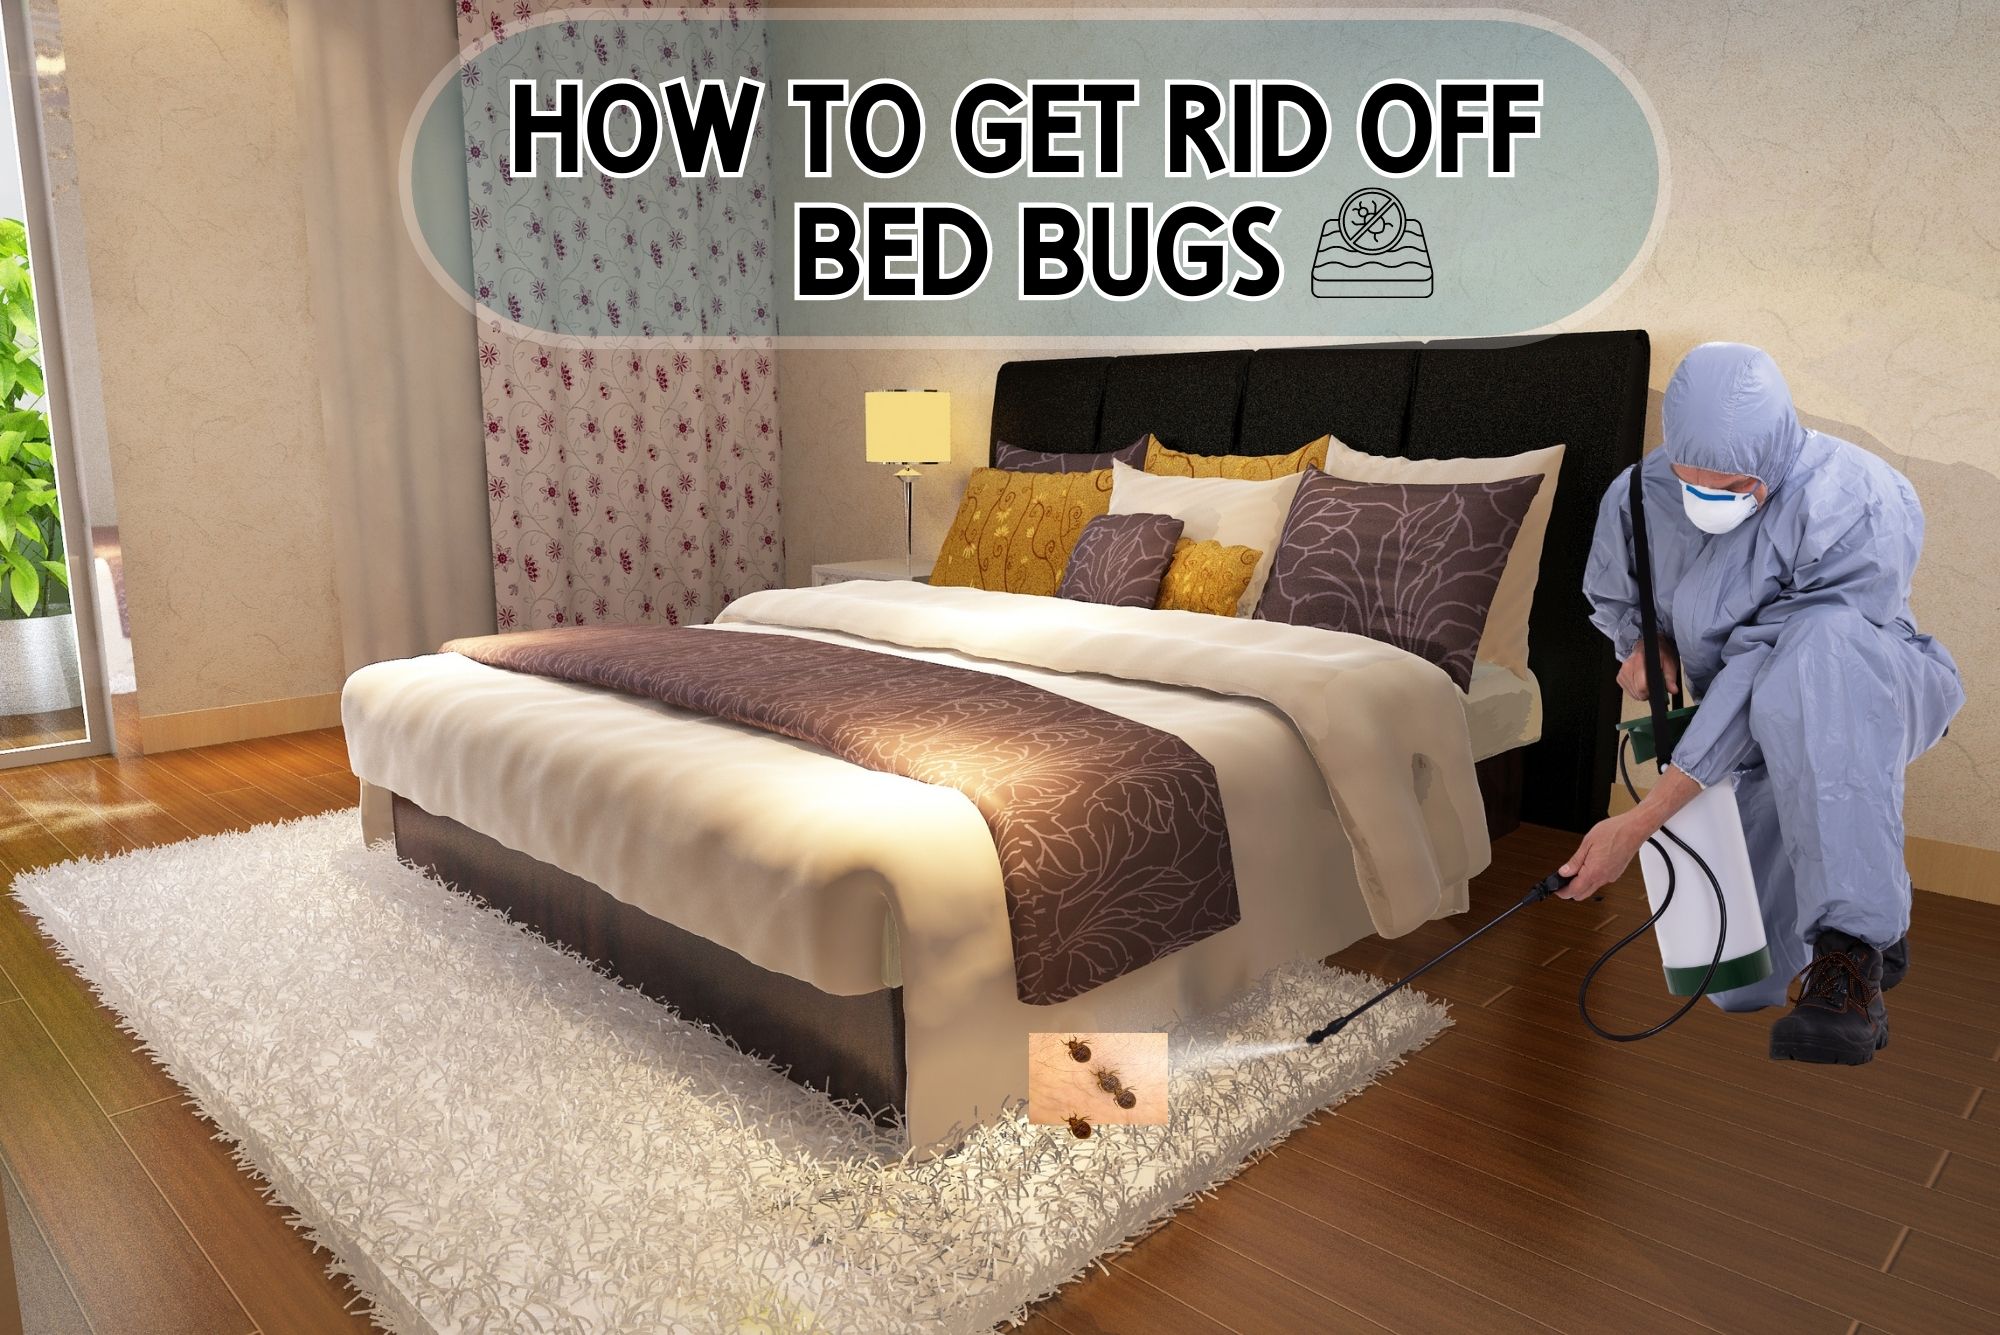 HOW TO GET RID OF BED BUGS ?